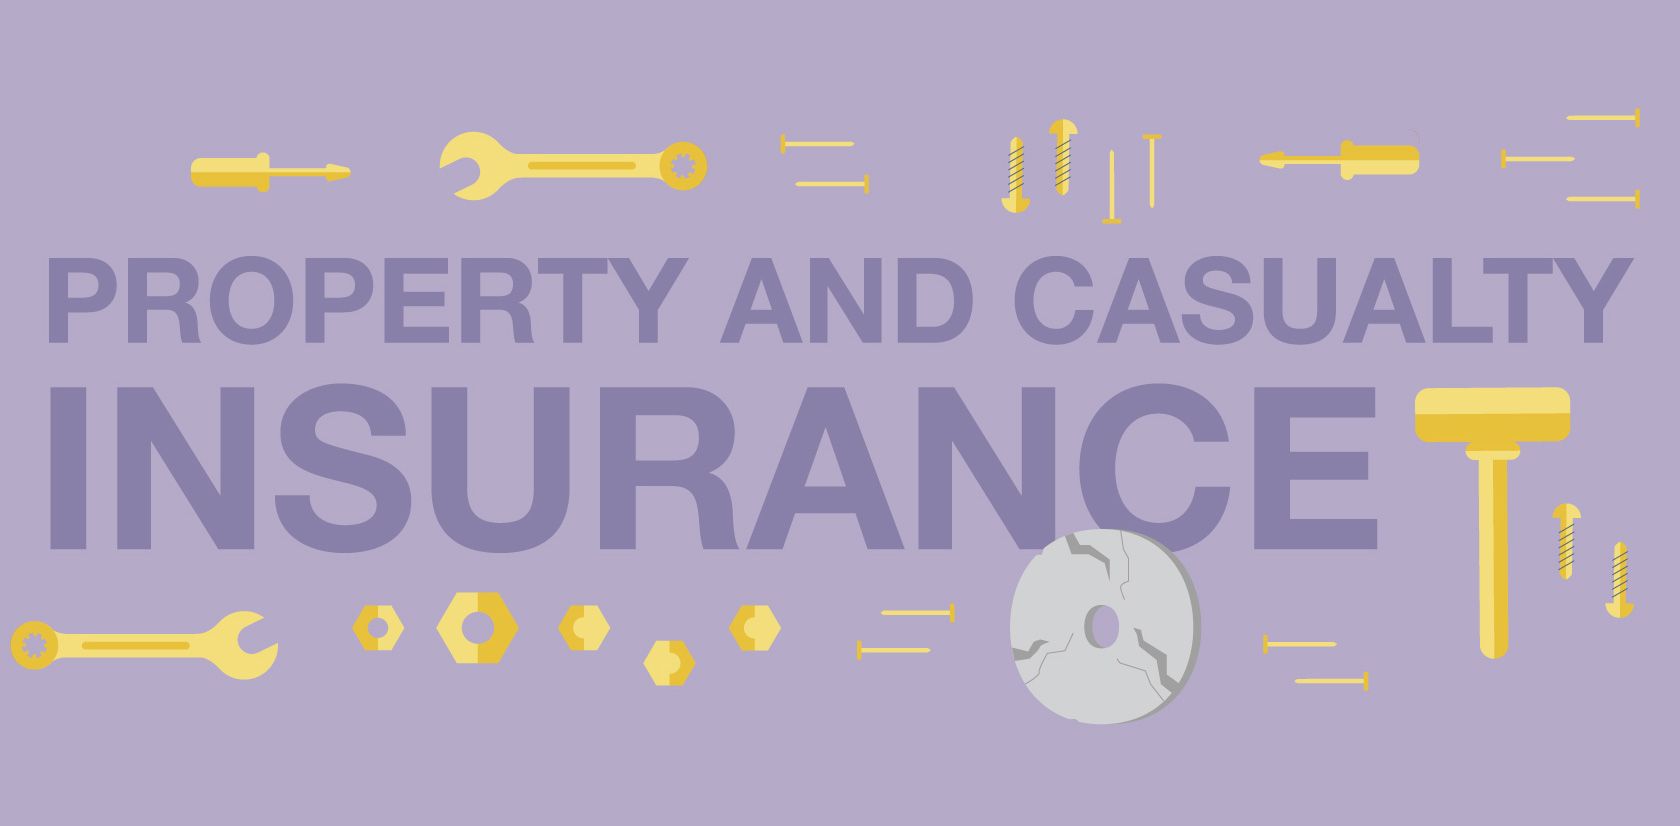 Property and casualty insurance - Property and casualty insurance